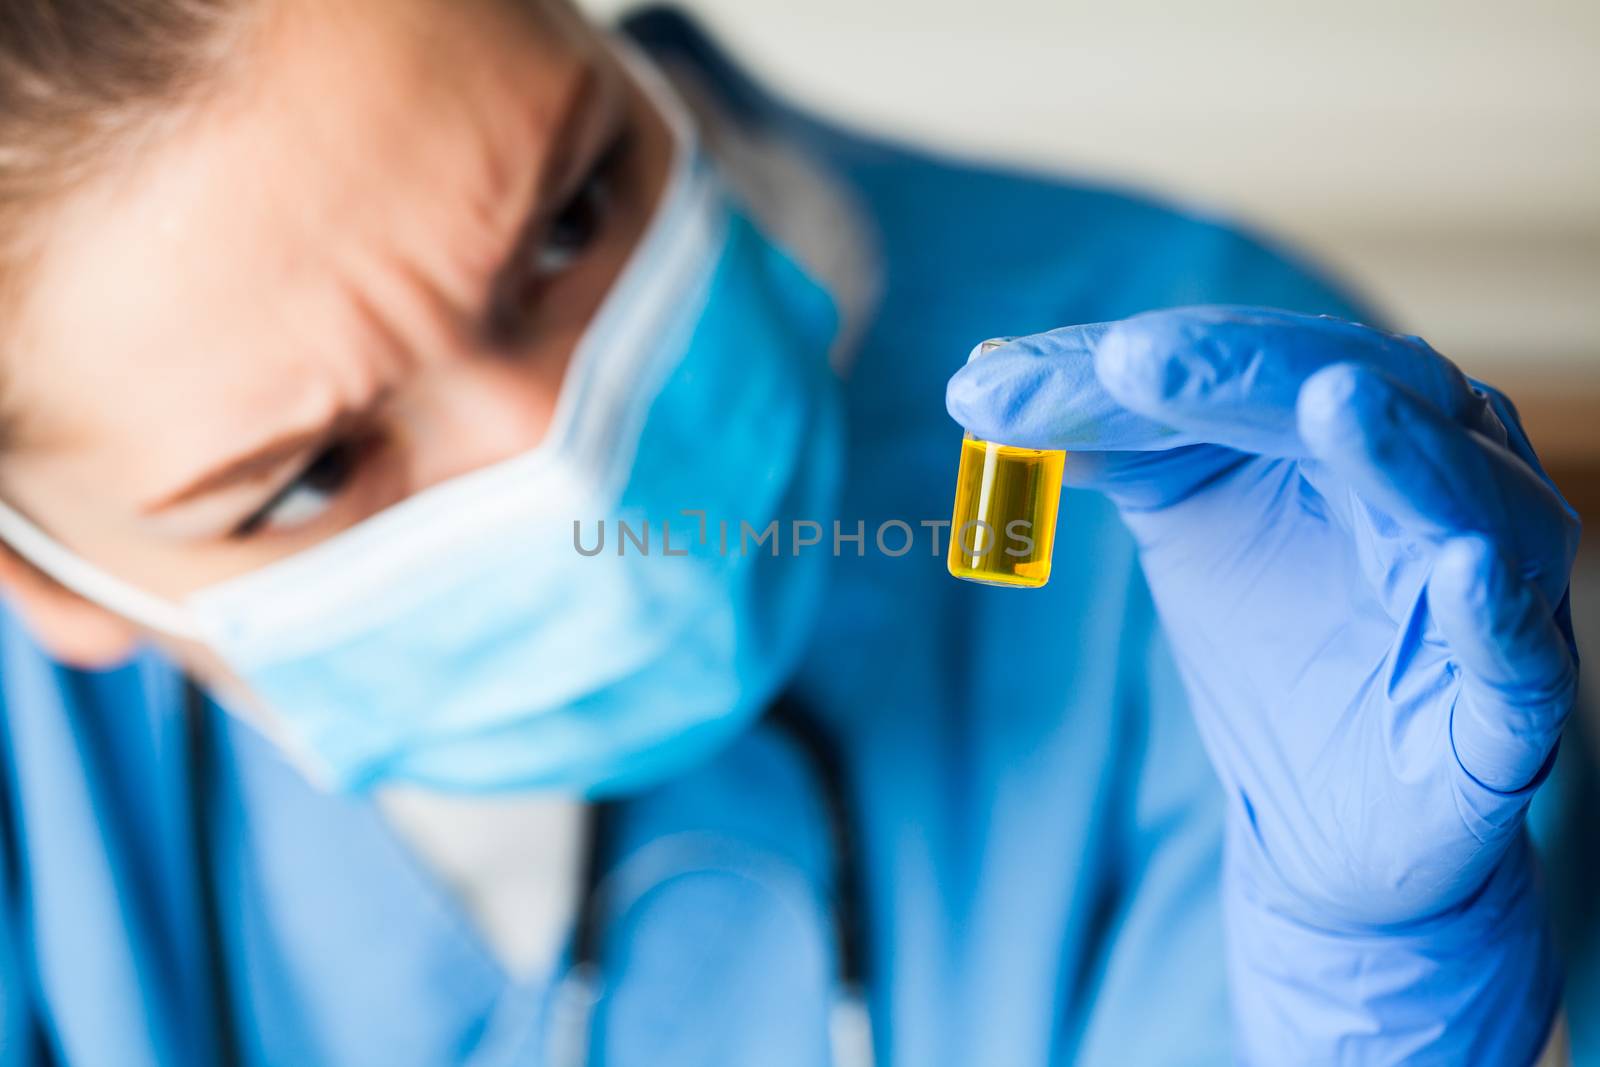 Medical worker inspecting ampoule vial bottle filled with yellow by Plyushkin